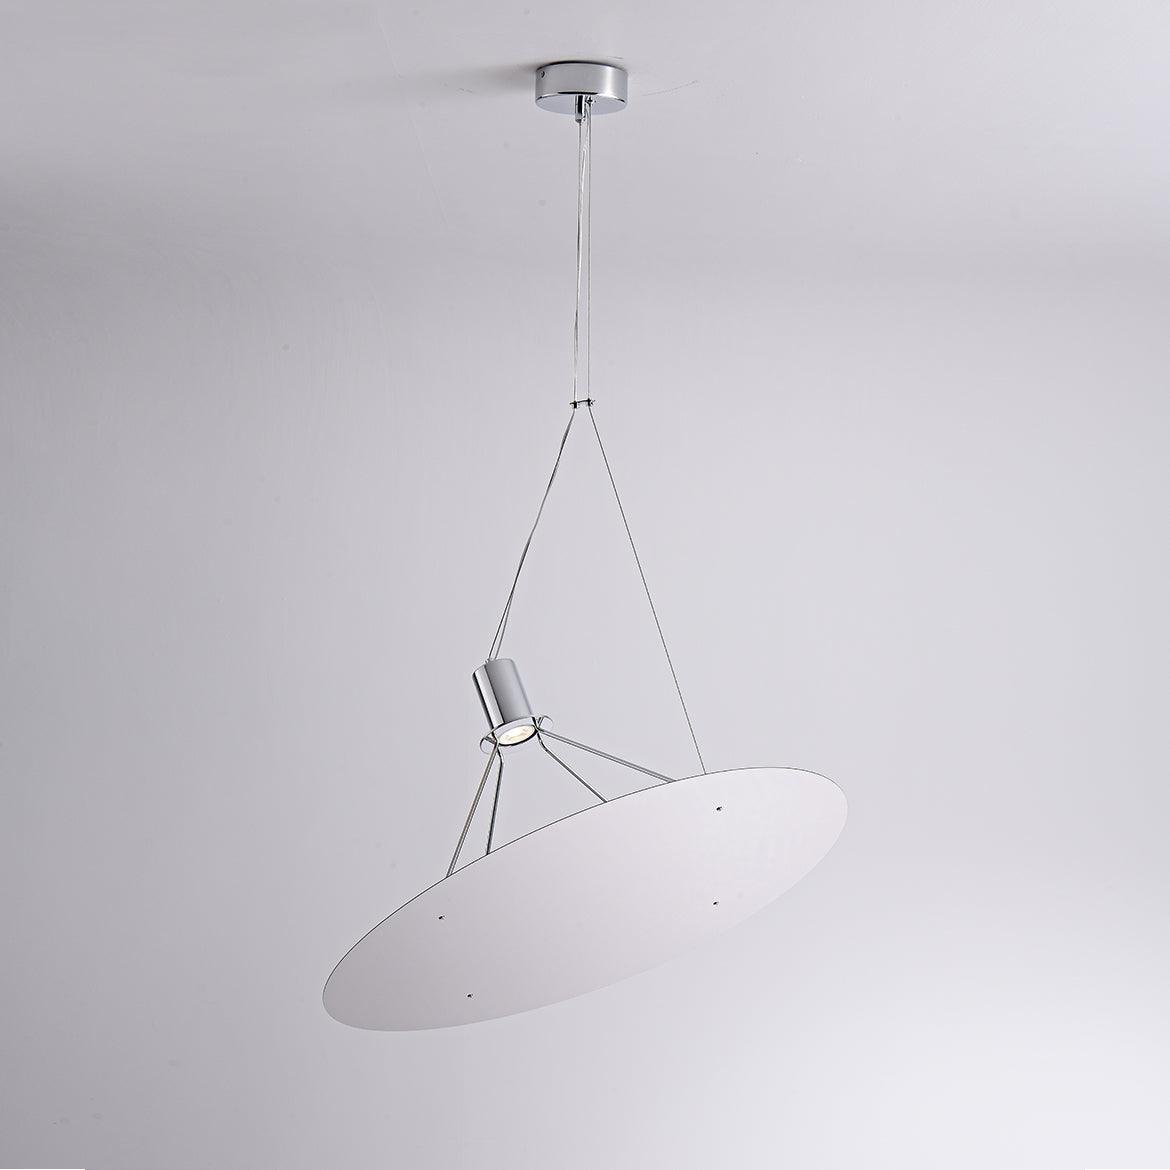 Amisol Pendant Lamp - Chrome, Cool White - Diameter 47.2 inches x Height 15.7 inches (120 cm x 40 cm)